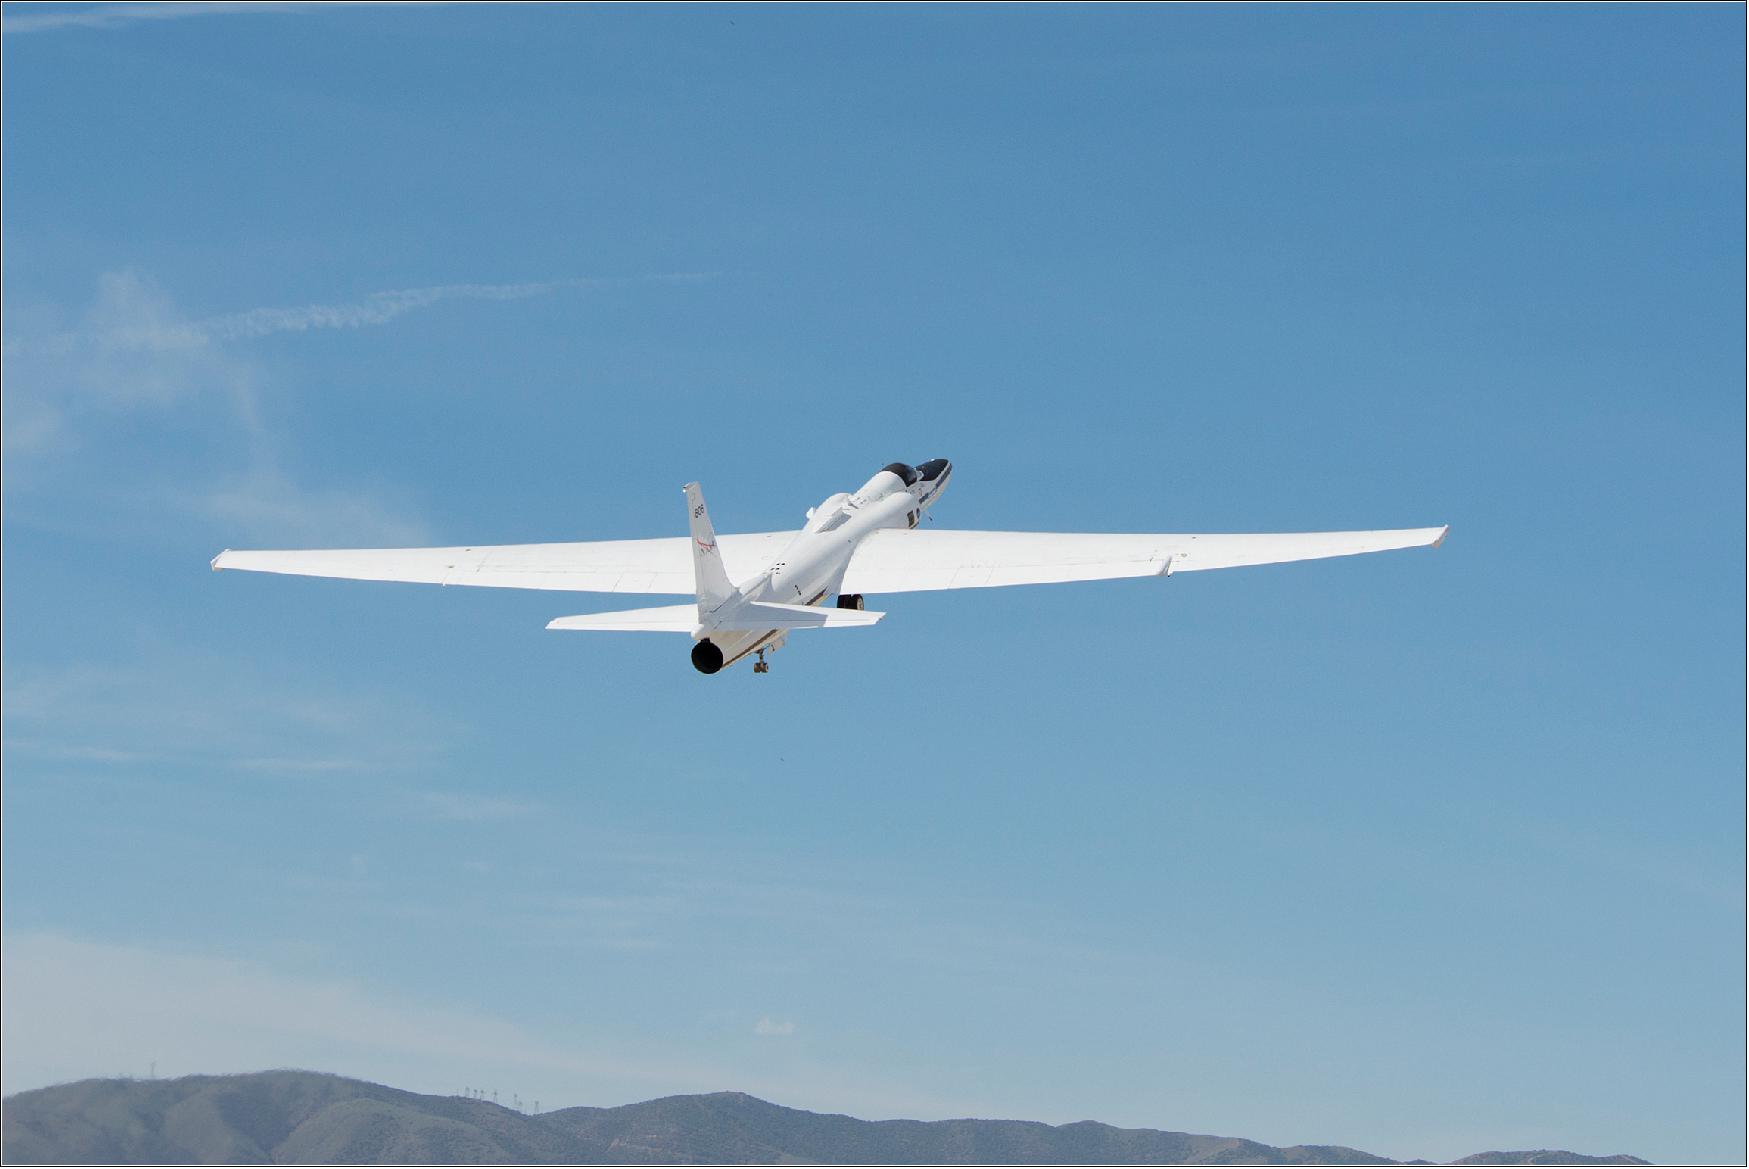 Figure 16: NASA’s ER-2 aircraft takes off from its base of operations at NASA’s Armstrong Flight Research Center in Palmdale, California to test instruments that will support upcoming science flights for GOES-16 (image credit: NASA)